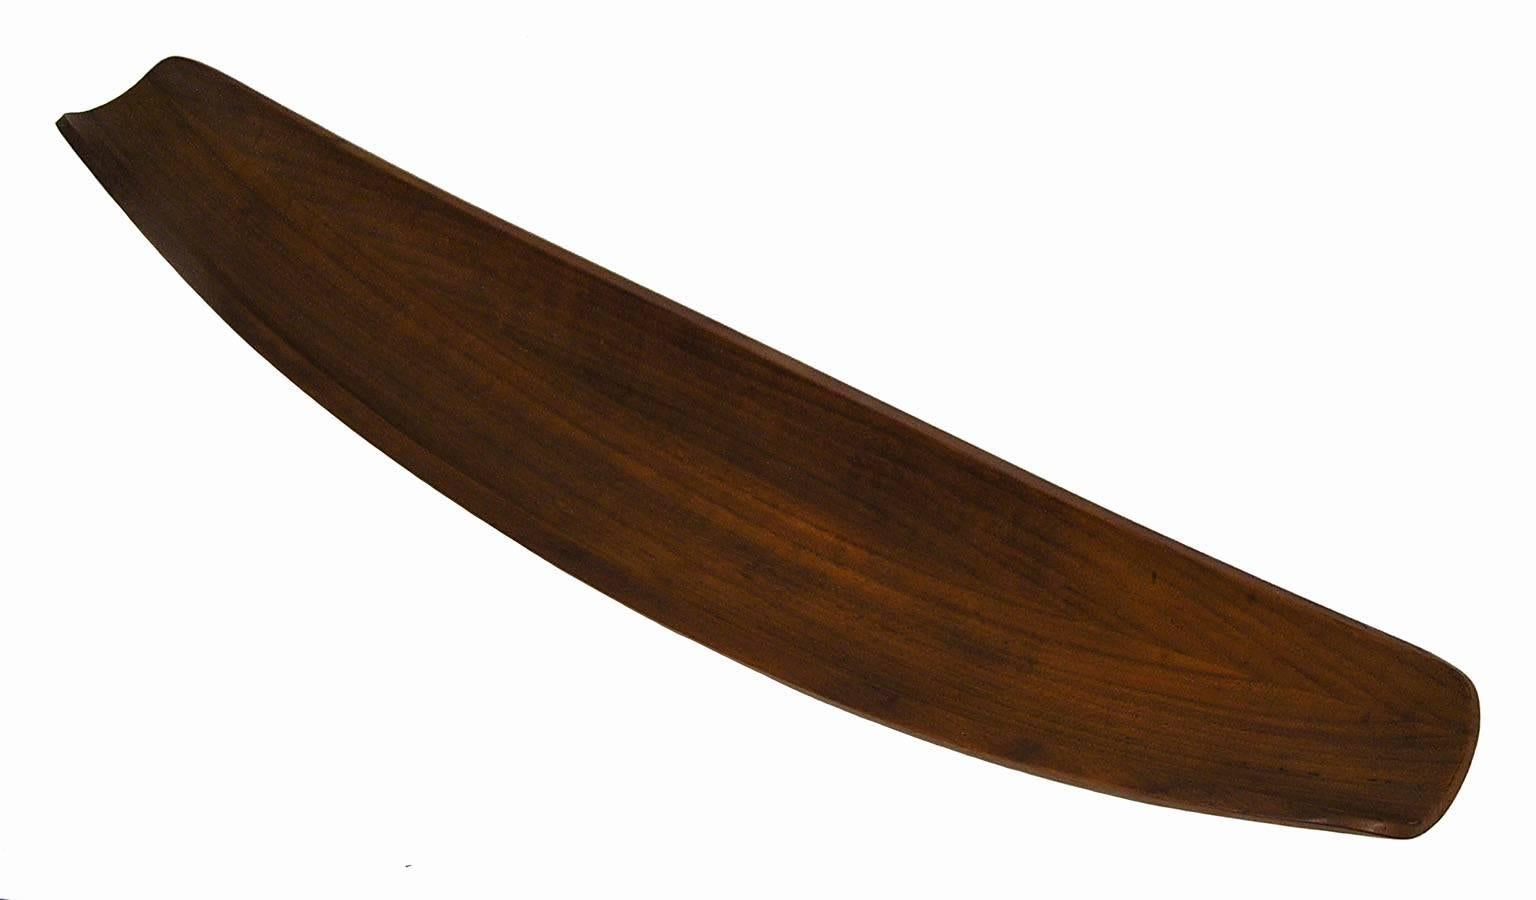 A beautiful staved teak bowl from the 1950s designed by Jens Quistgaard of Denmark. Commonly referred to as the 